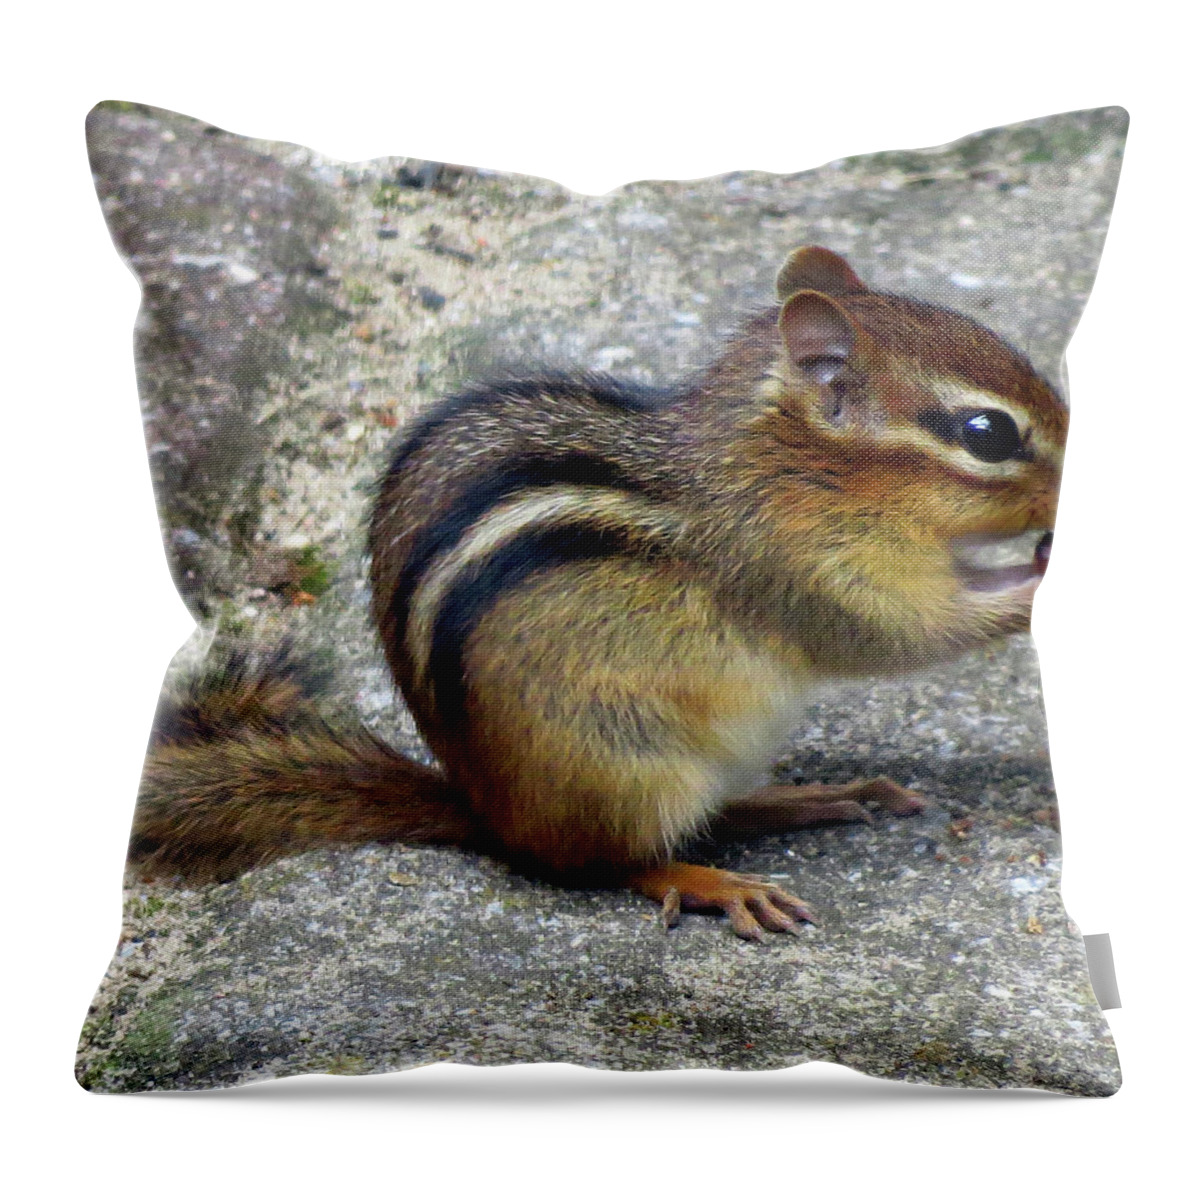 Chipmunk Throw Pillow featuring the photograph Chipmunk Eating a Grape by Linda Stern